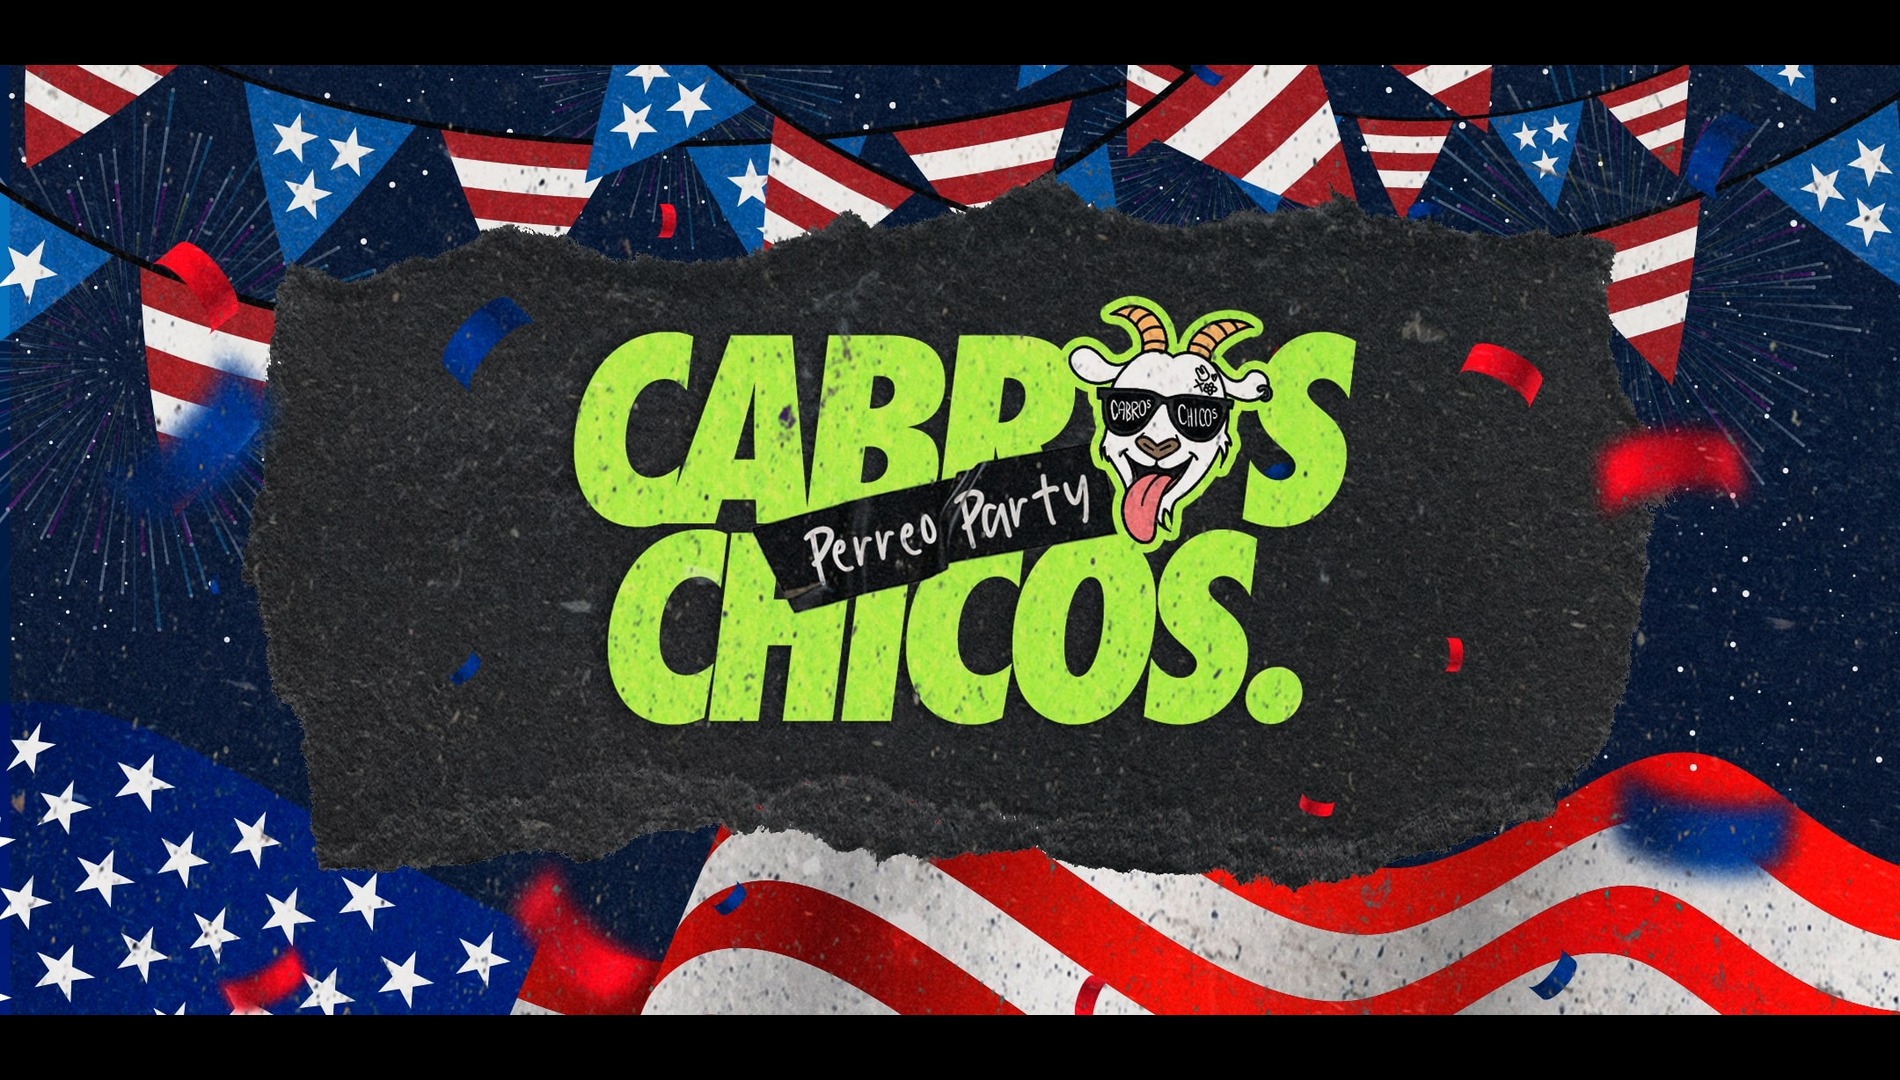 Cabros Chicos - Pre-Independence Day Party